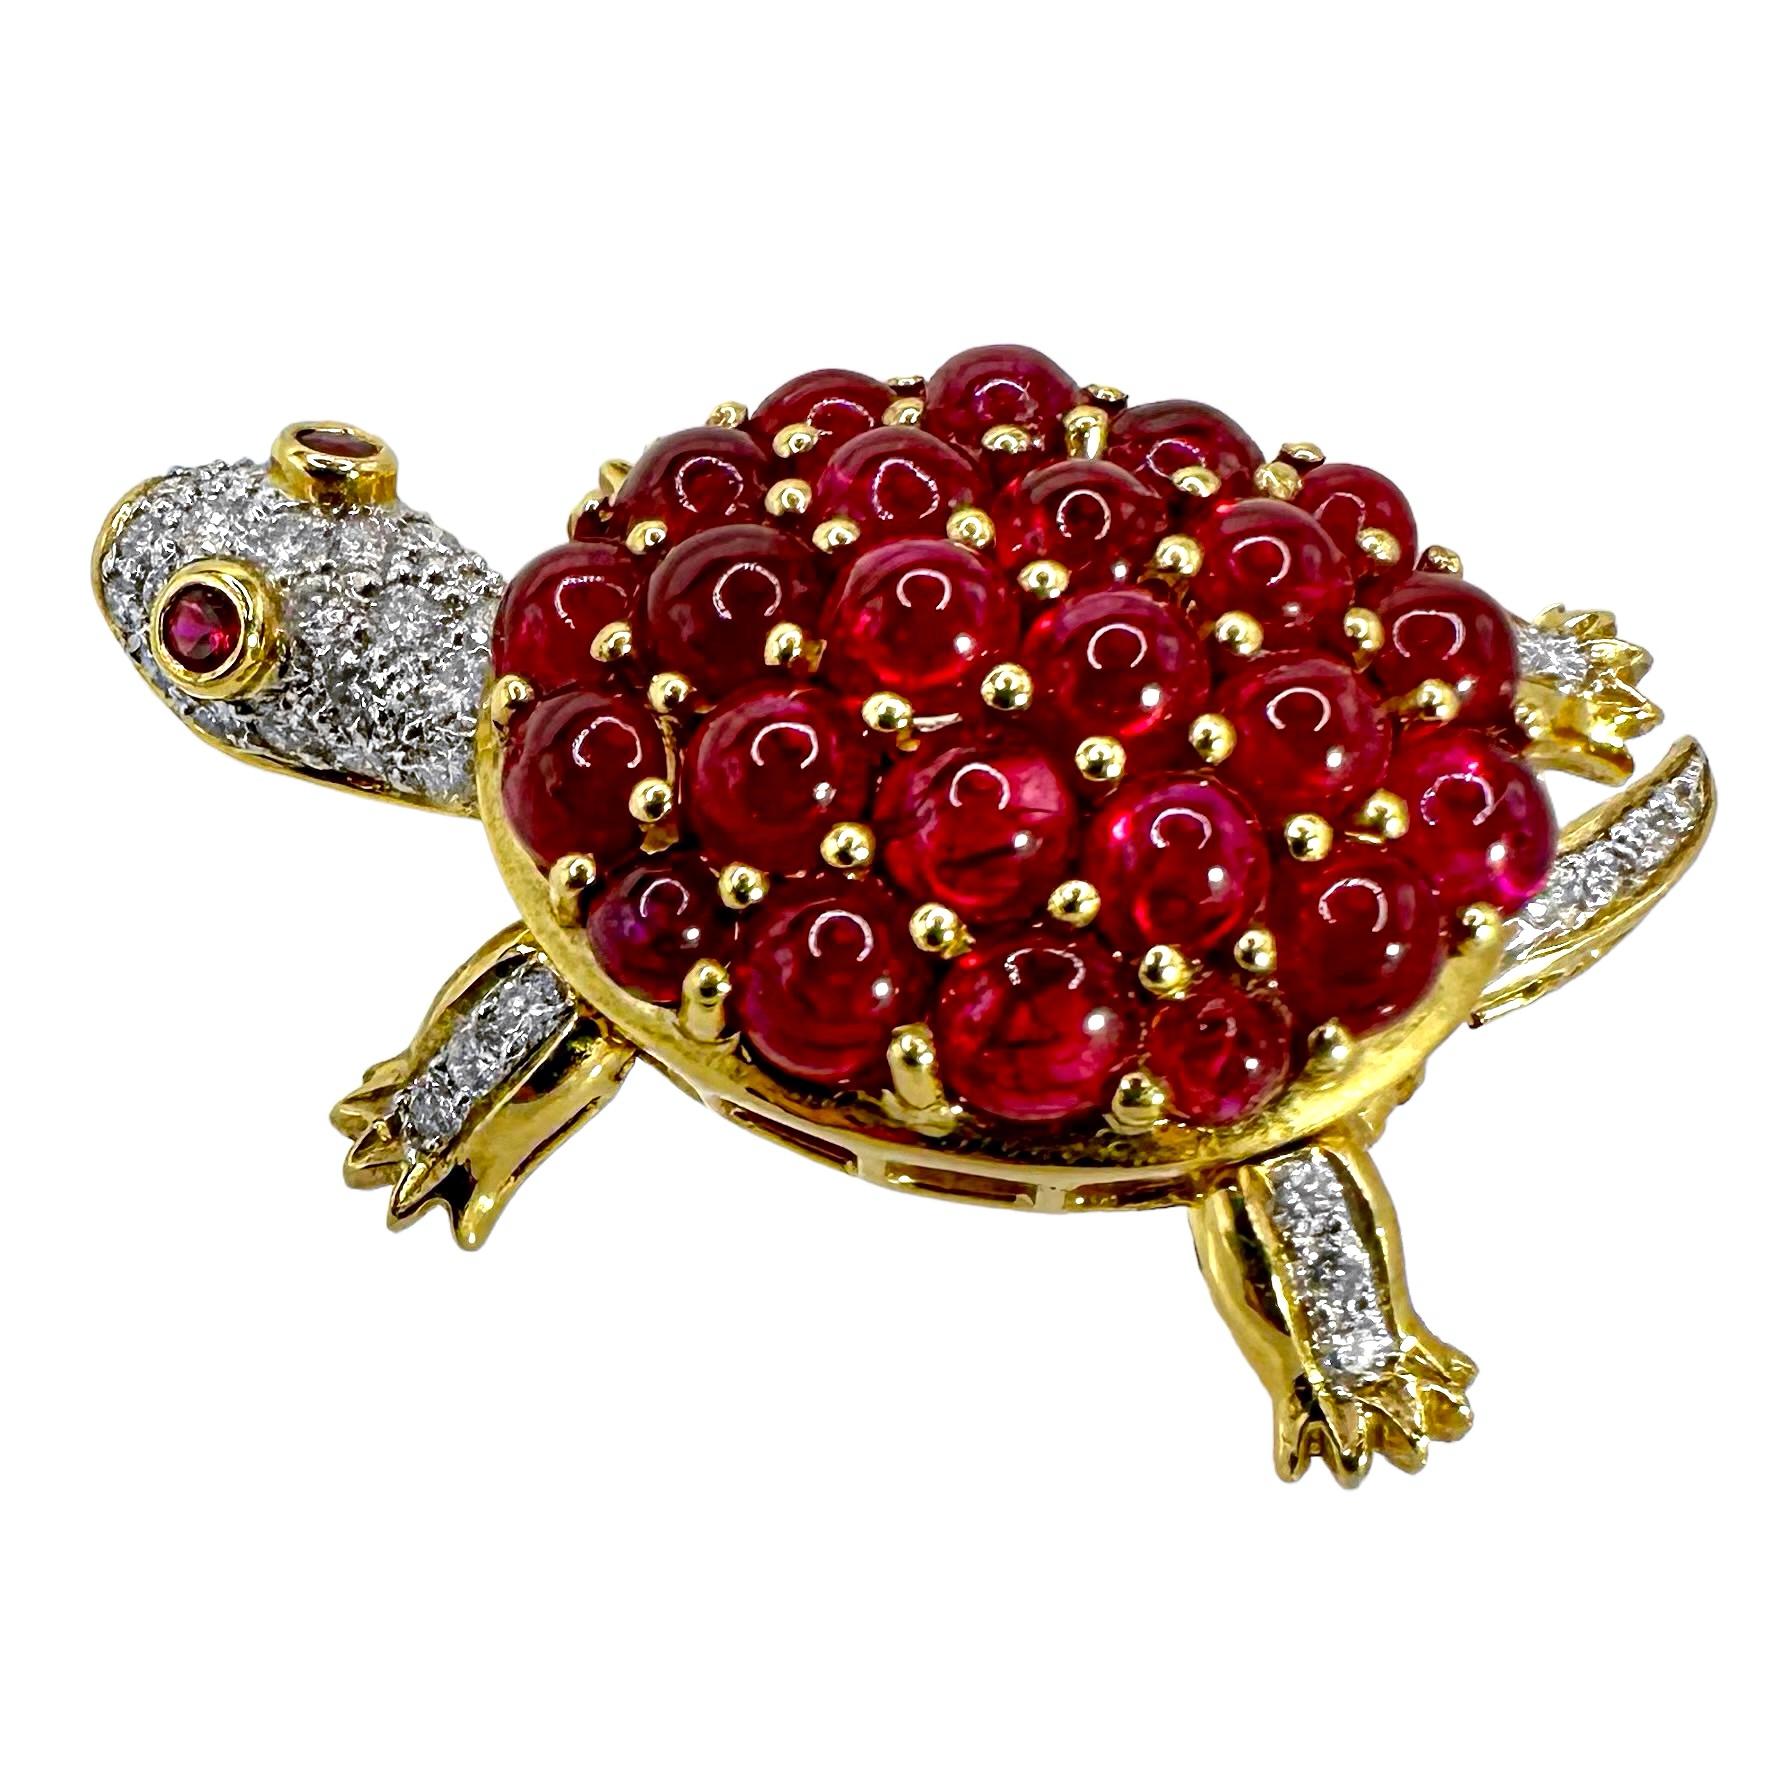 An amazing little movable terrapin in 18K yellow gold set with diamonds and rubies. The diamond encrusted head has two faceted, ruby eyes, and the turtle shell is set with vibrant, cabochon rubies. The four legs and the tail are set with round